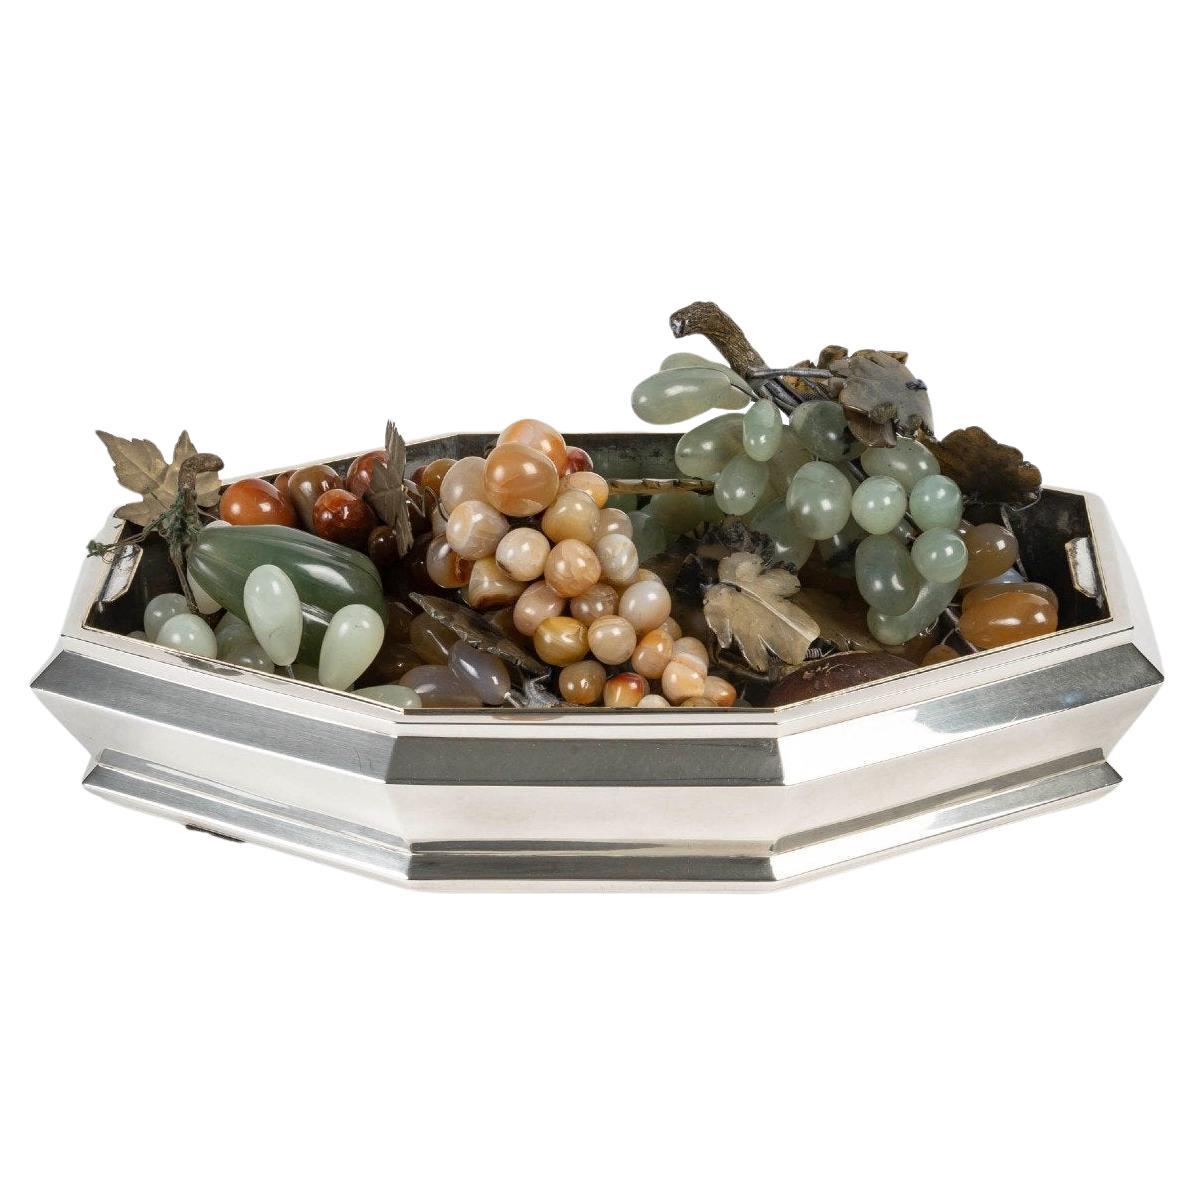 Goldsmith Ruys - Modernist Planter In Silver Metal Interior For Sale